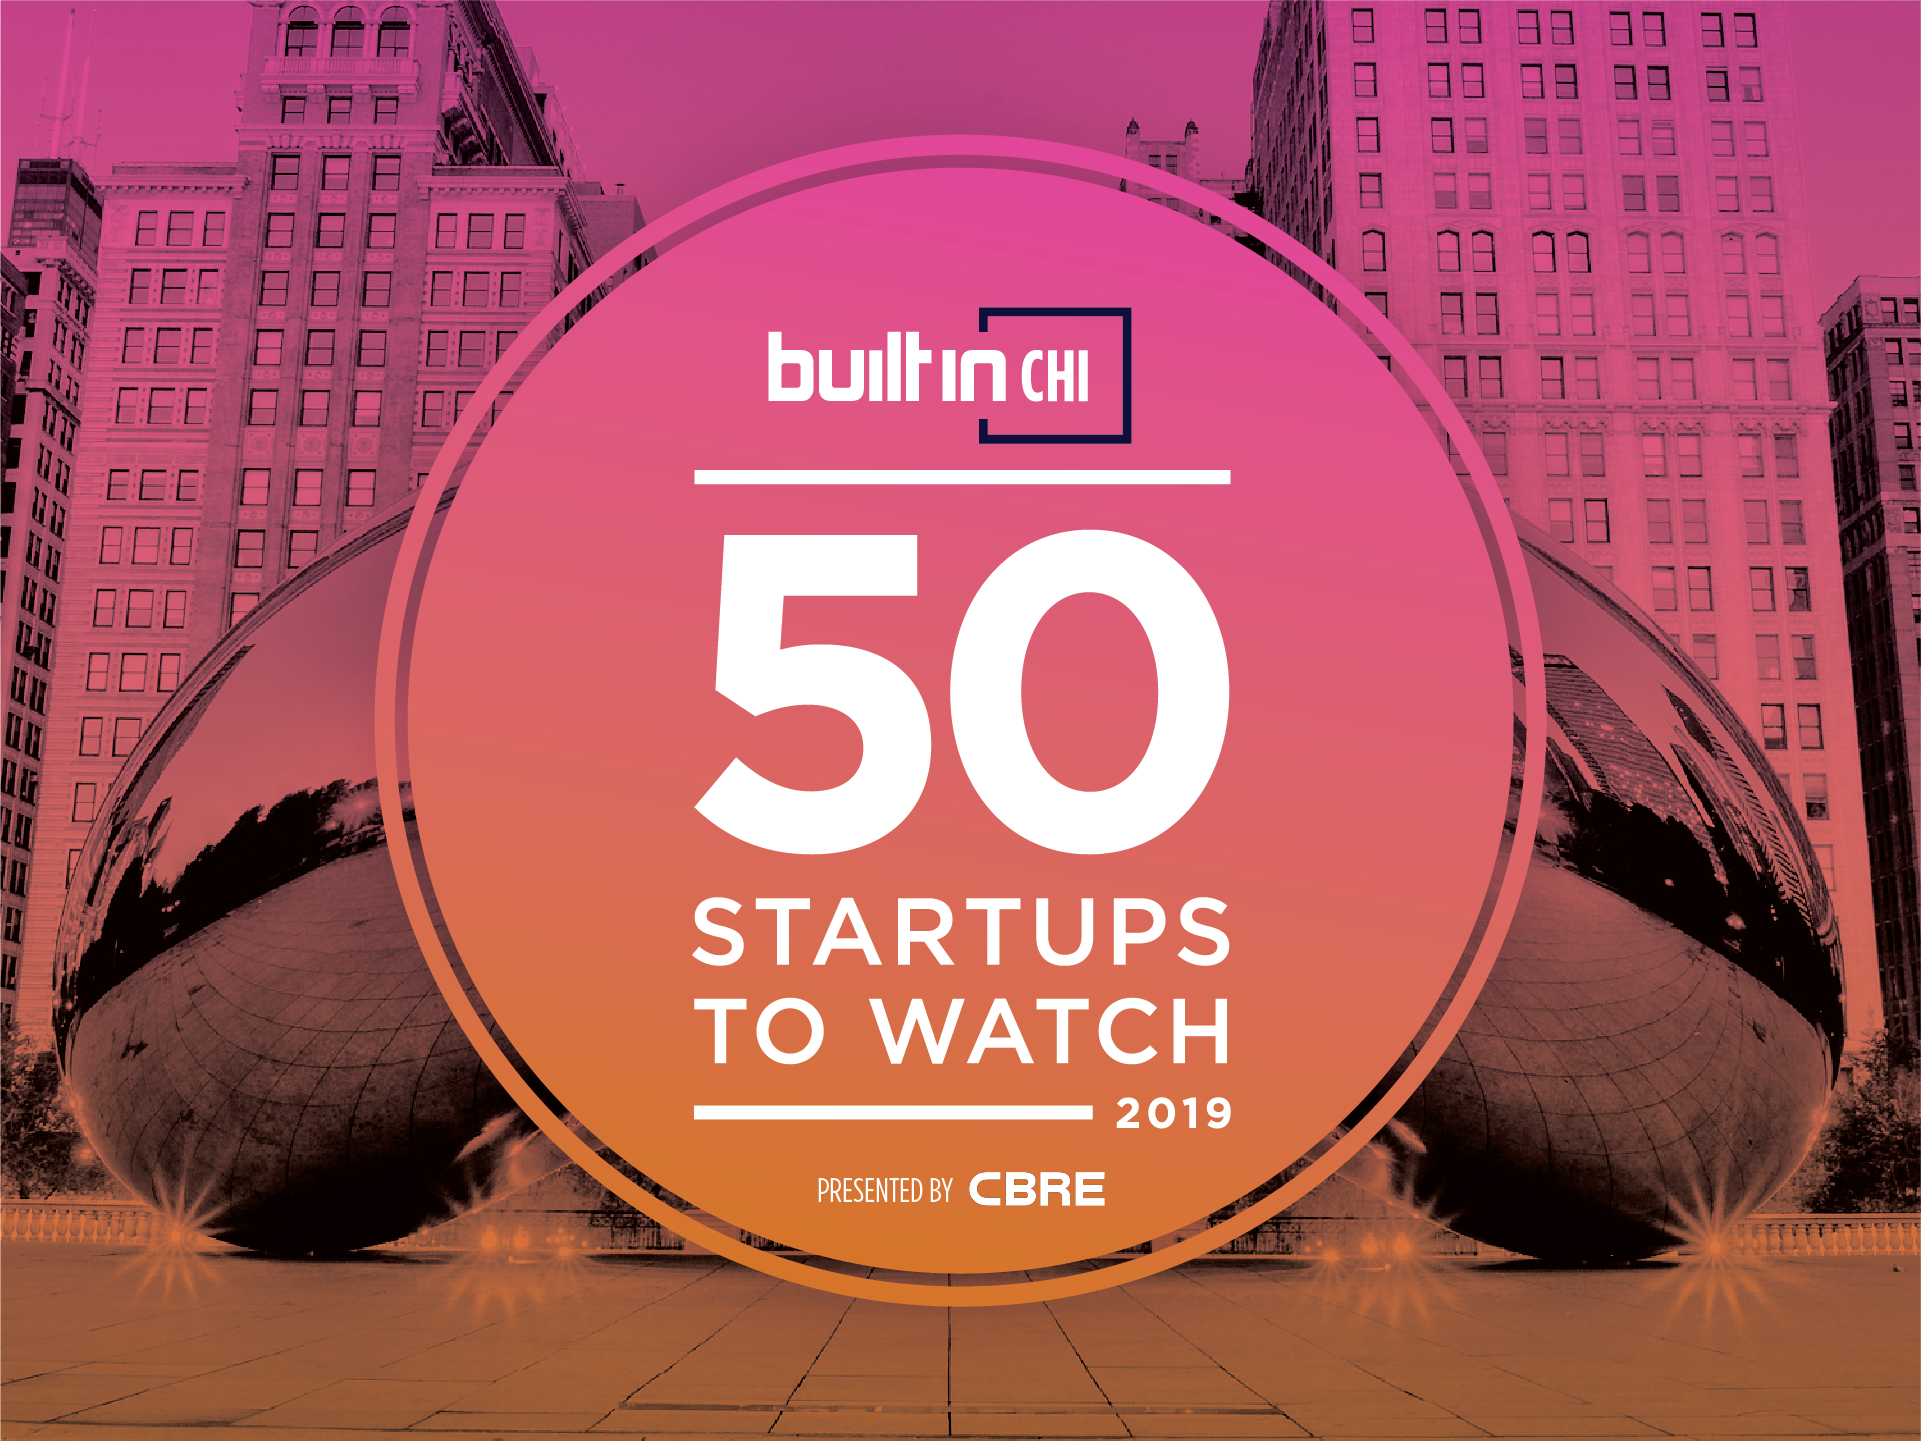 Built In Chicago's 50 Startups to Watch 2019